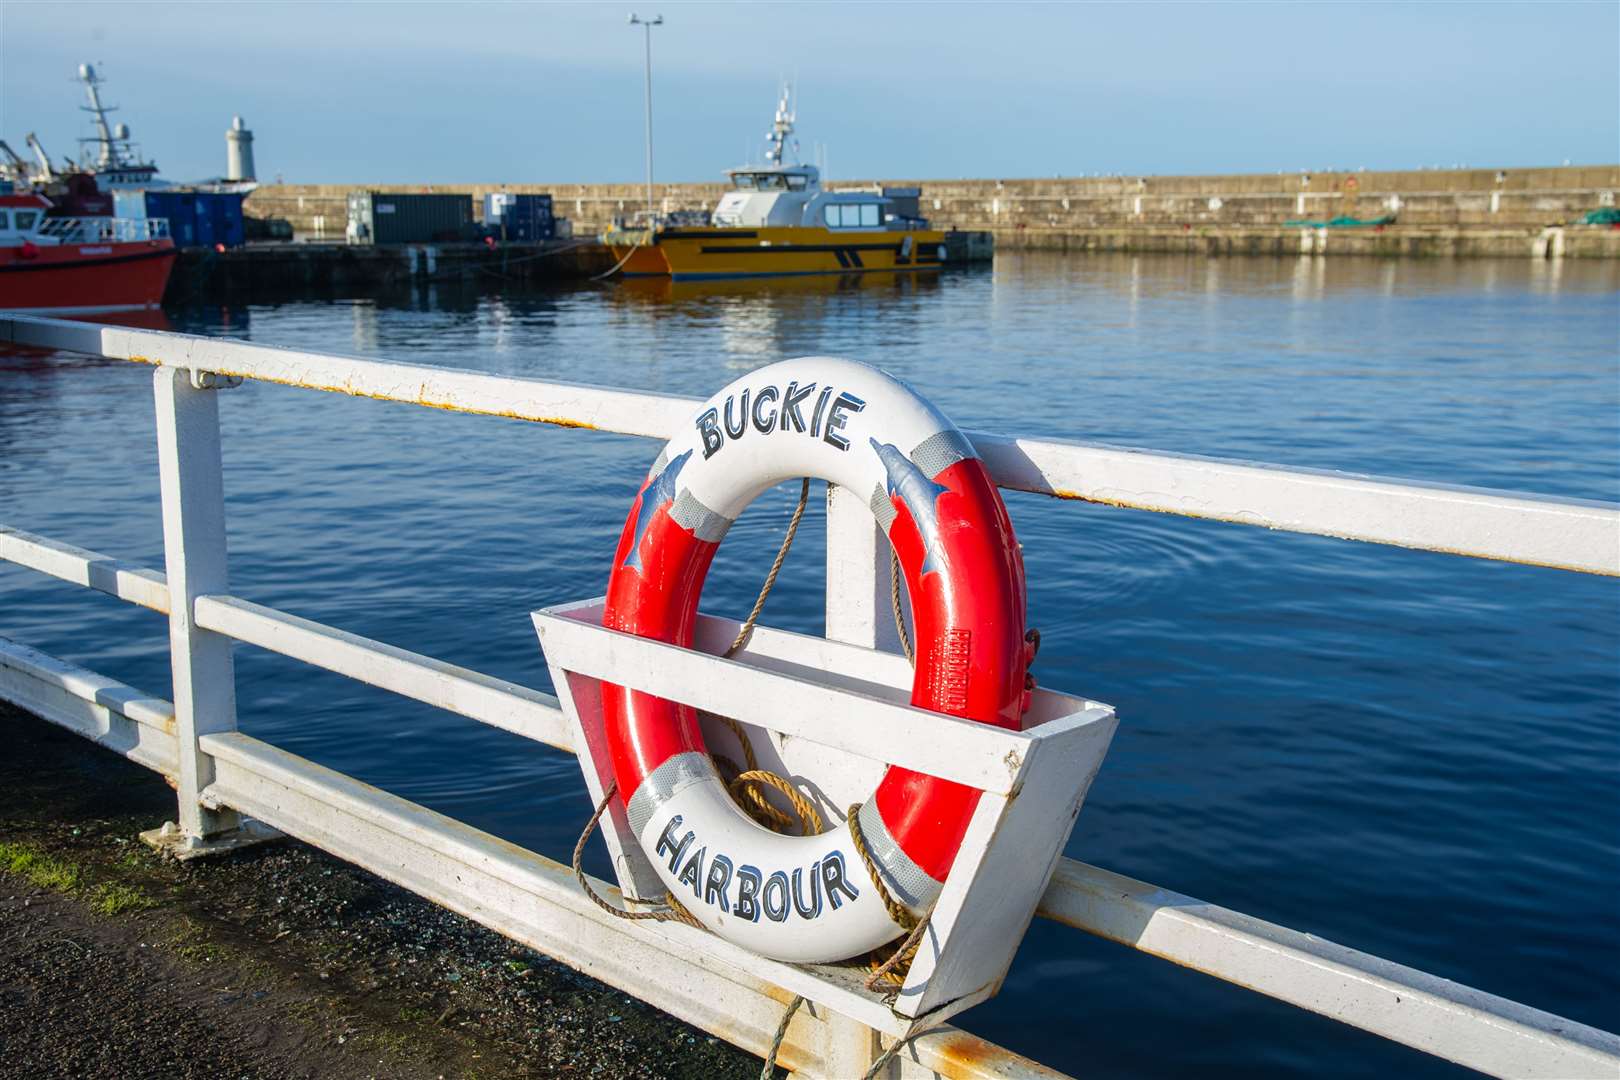 Just under 500 boxes of fish were landed at Buckie Harbour last week. Picture: Daniel Forsyth